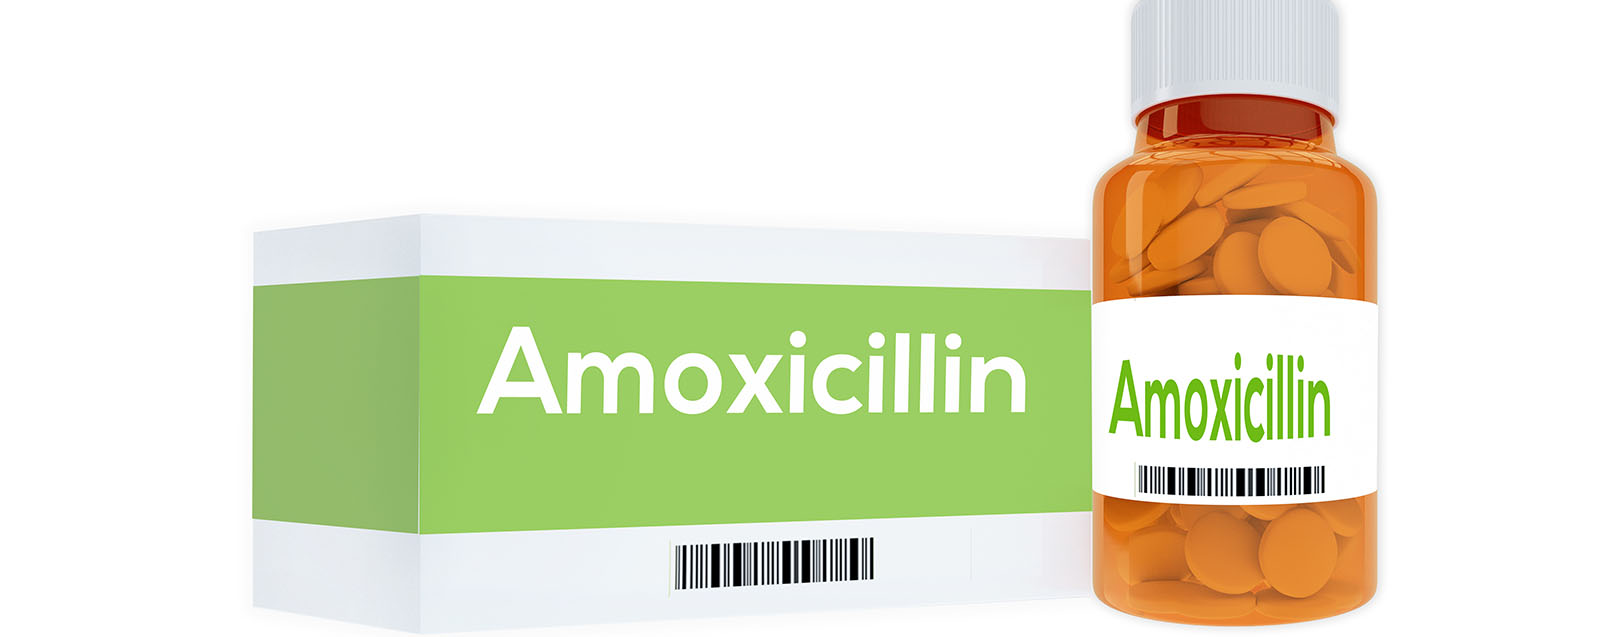 DGAD recommends anti-dumping duty on amoxycillin imports from China